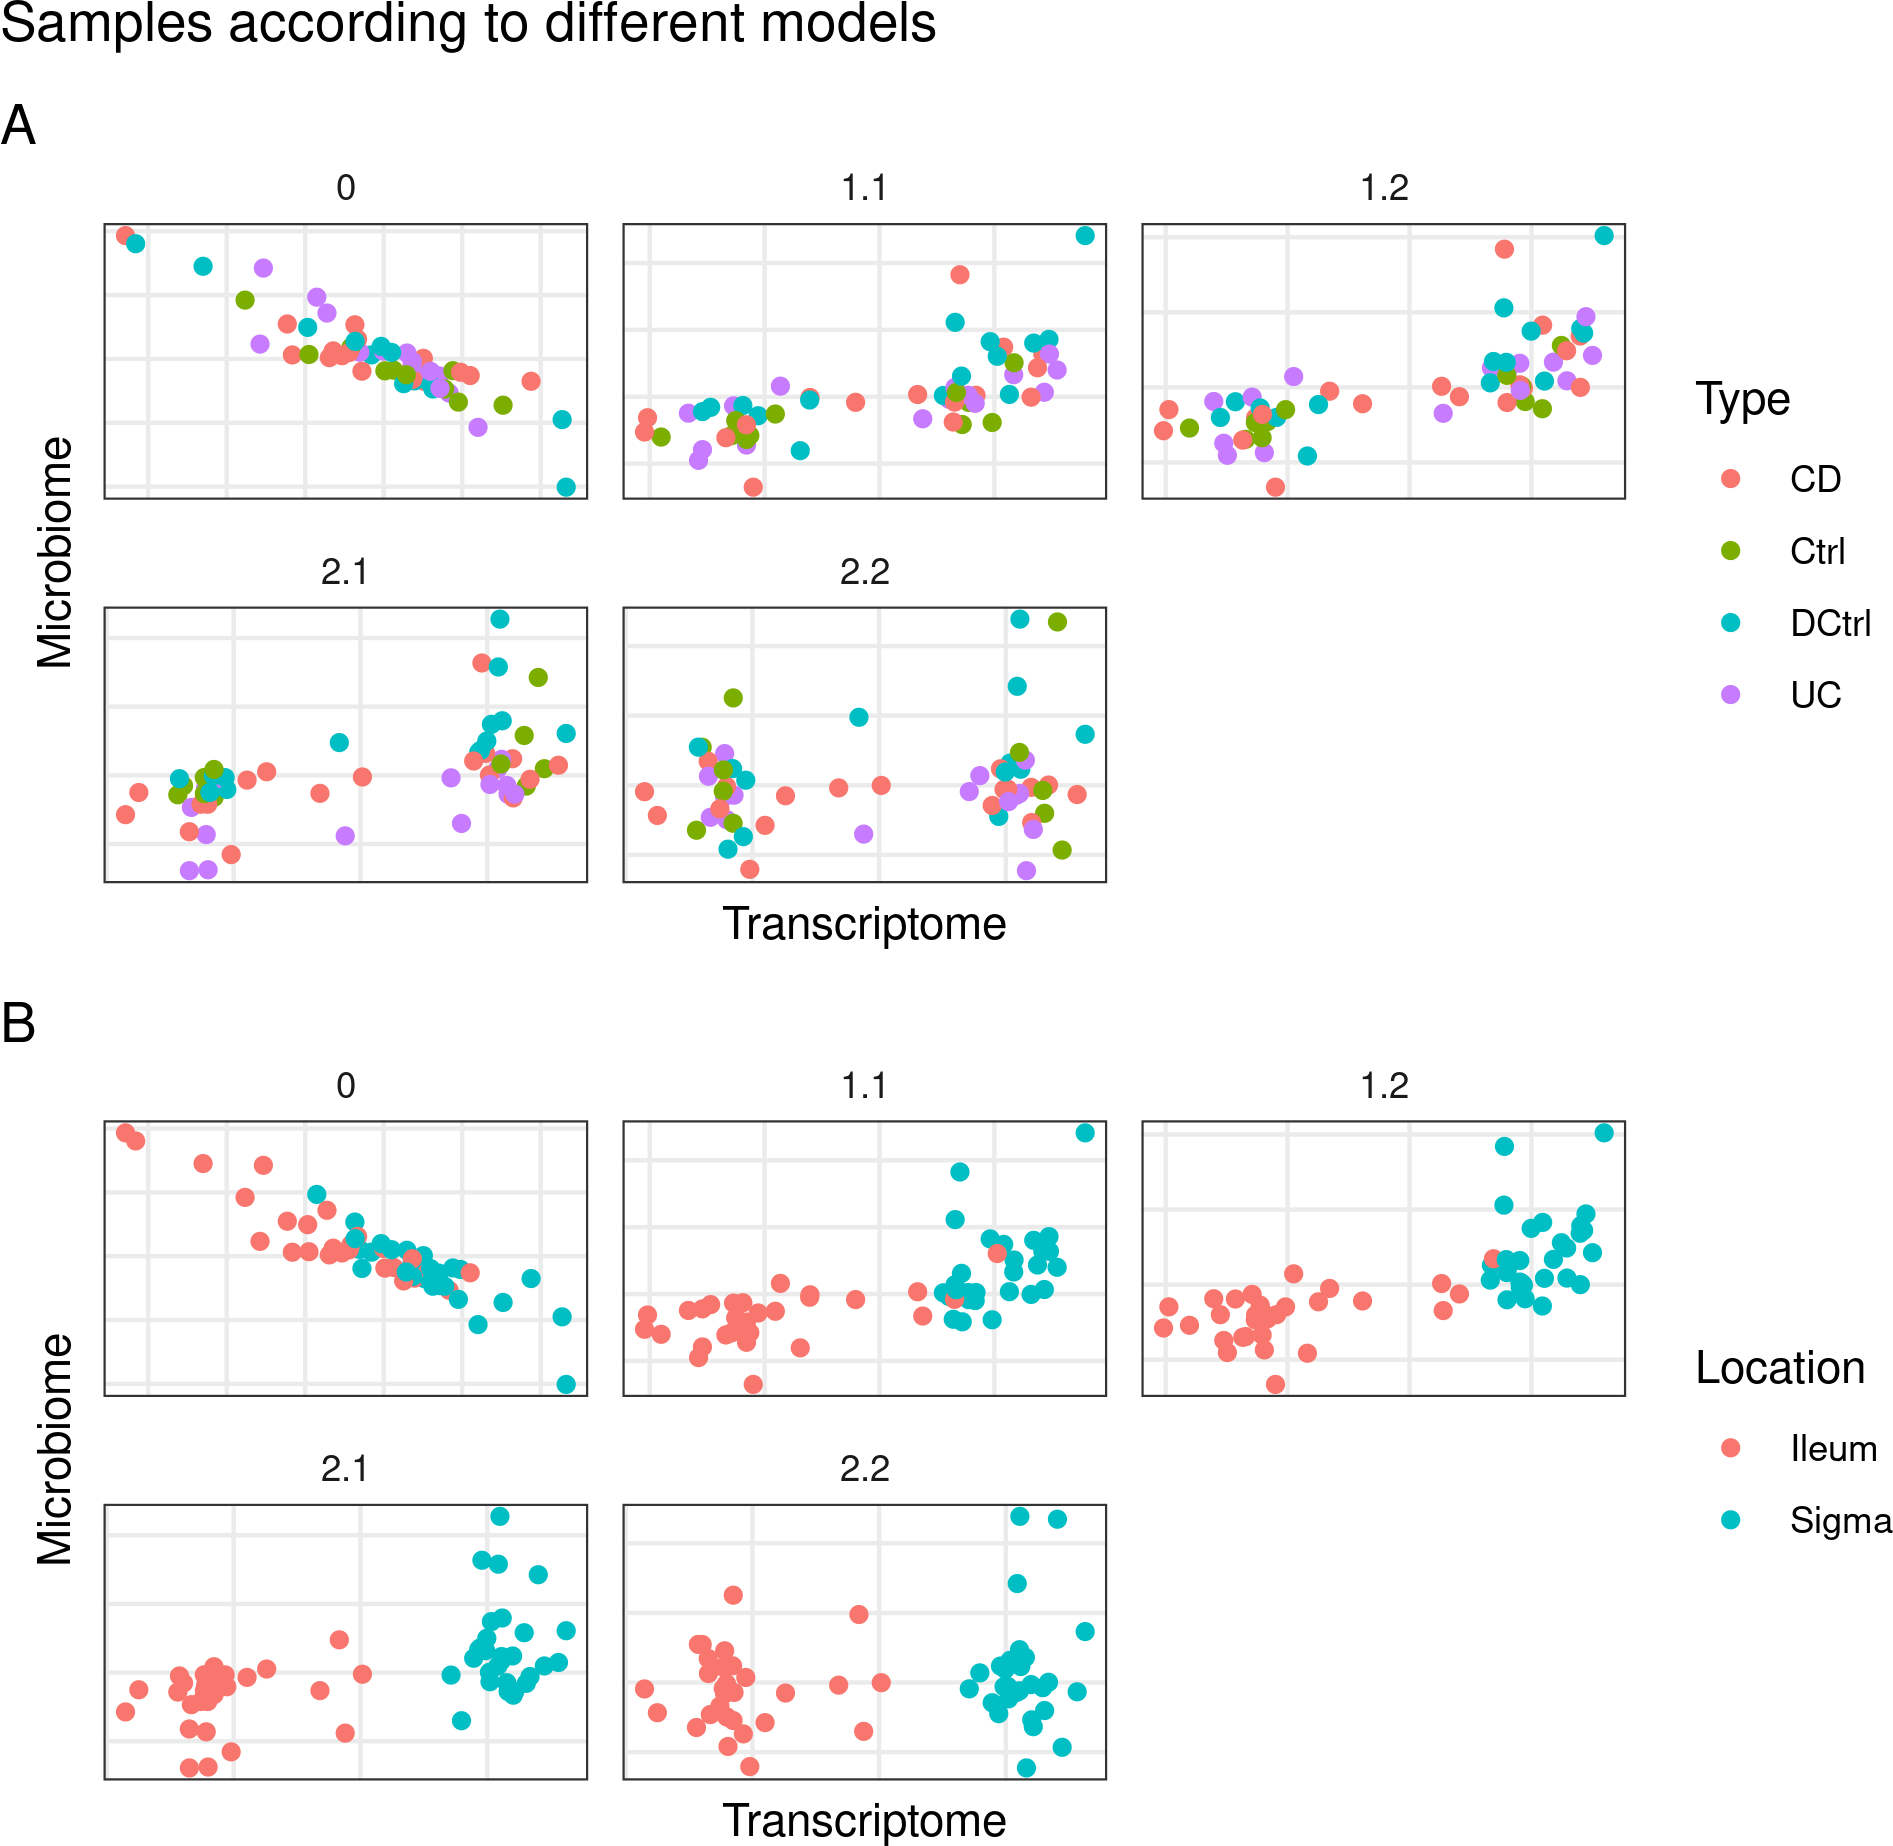 Models from inteRmodel in the Häsler's dataset. Model 0 with just the transcriptome and microbiome data. Models 1.1 to 1.2 with transcriptome, microbiome and sample data in a single block. Models 2.1 and 2.2 with transcriptome, microbiome and sample data in multiple blocks. On the A panel colored by disease on the B panel colored by location of the sample.